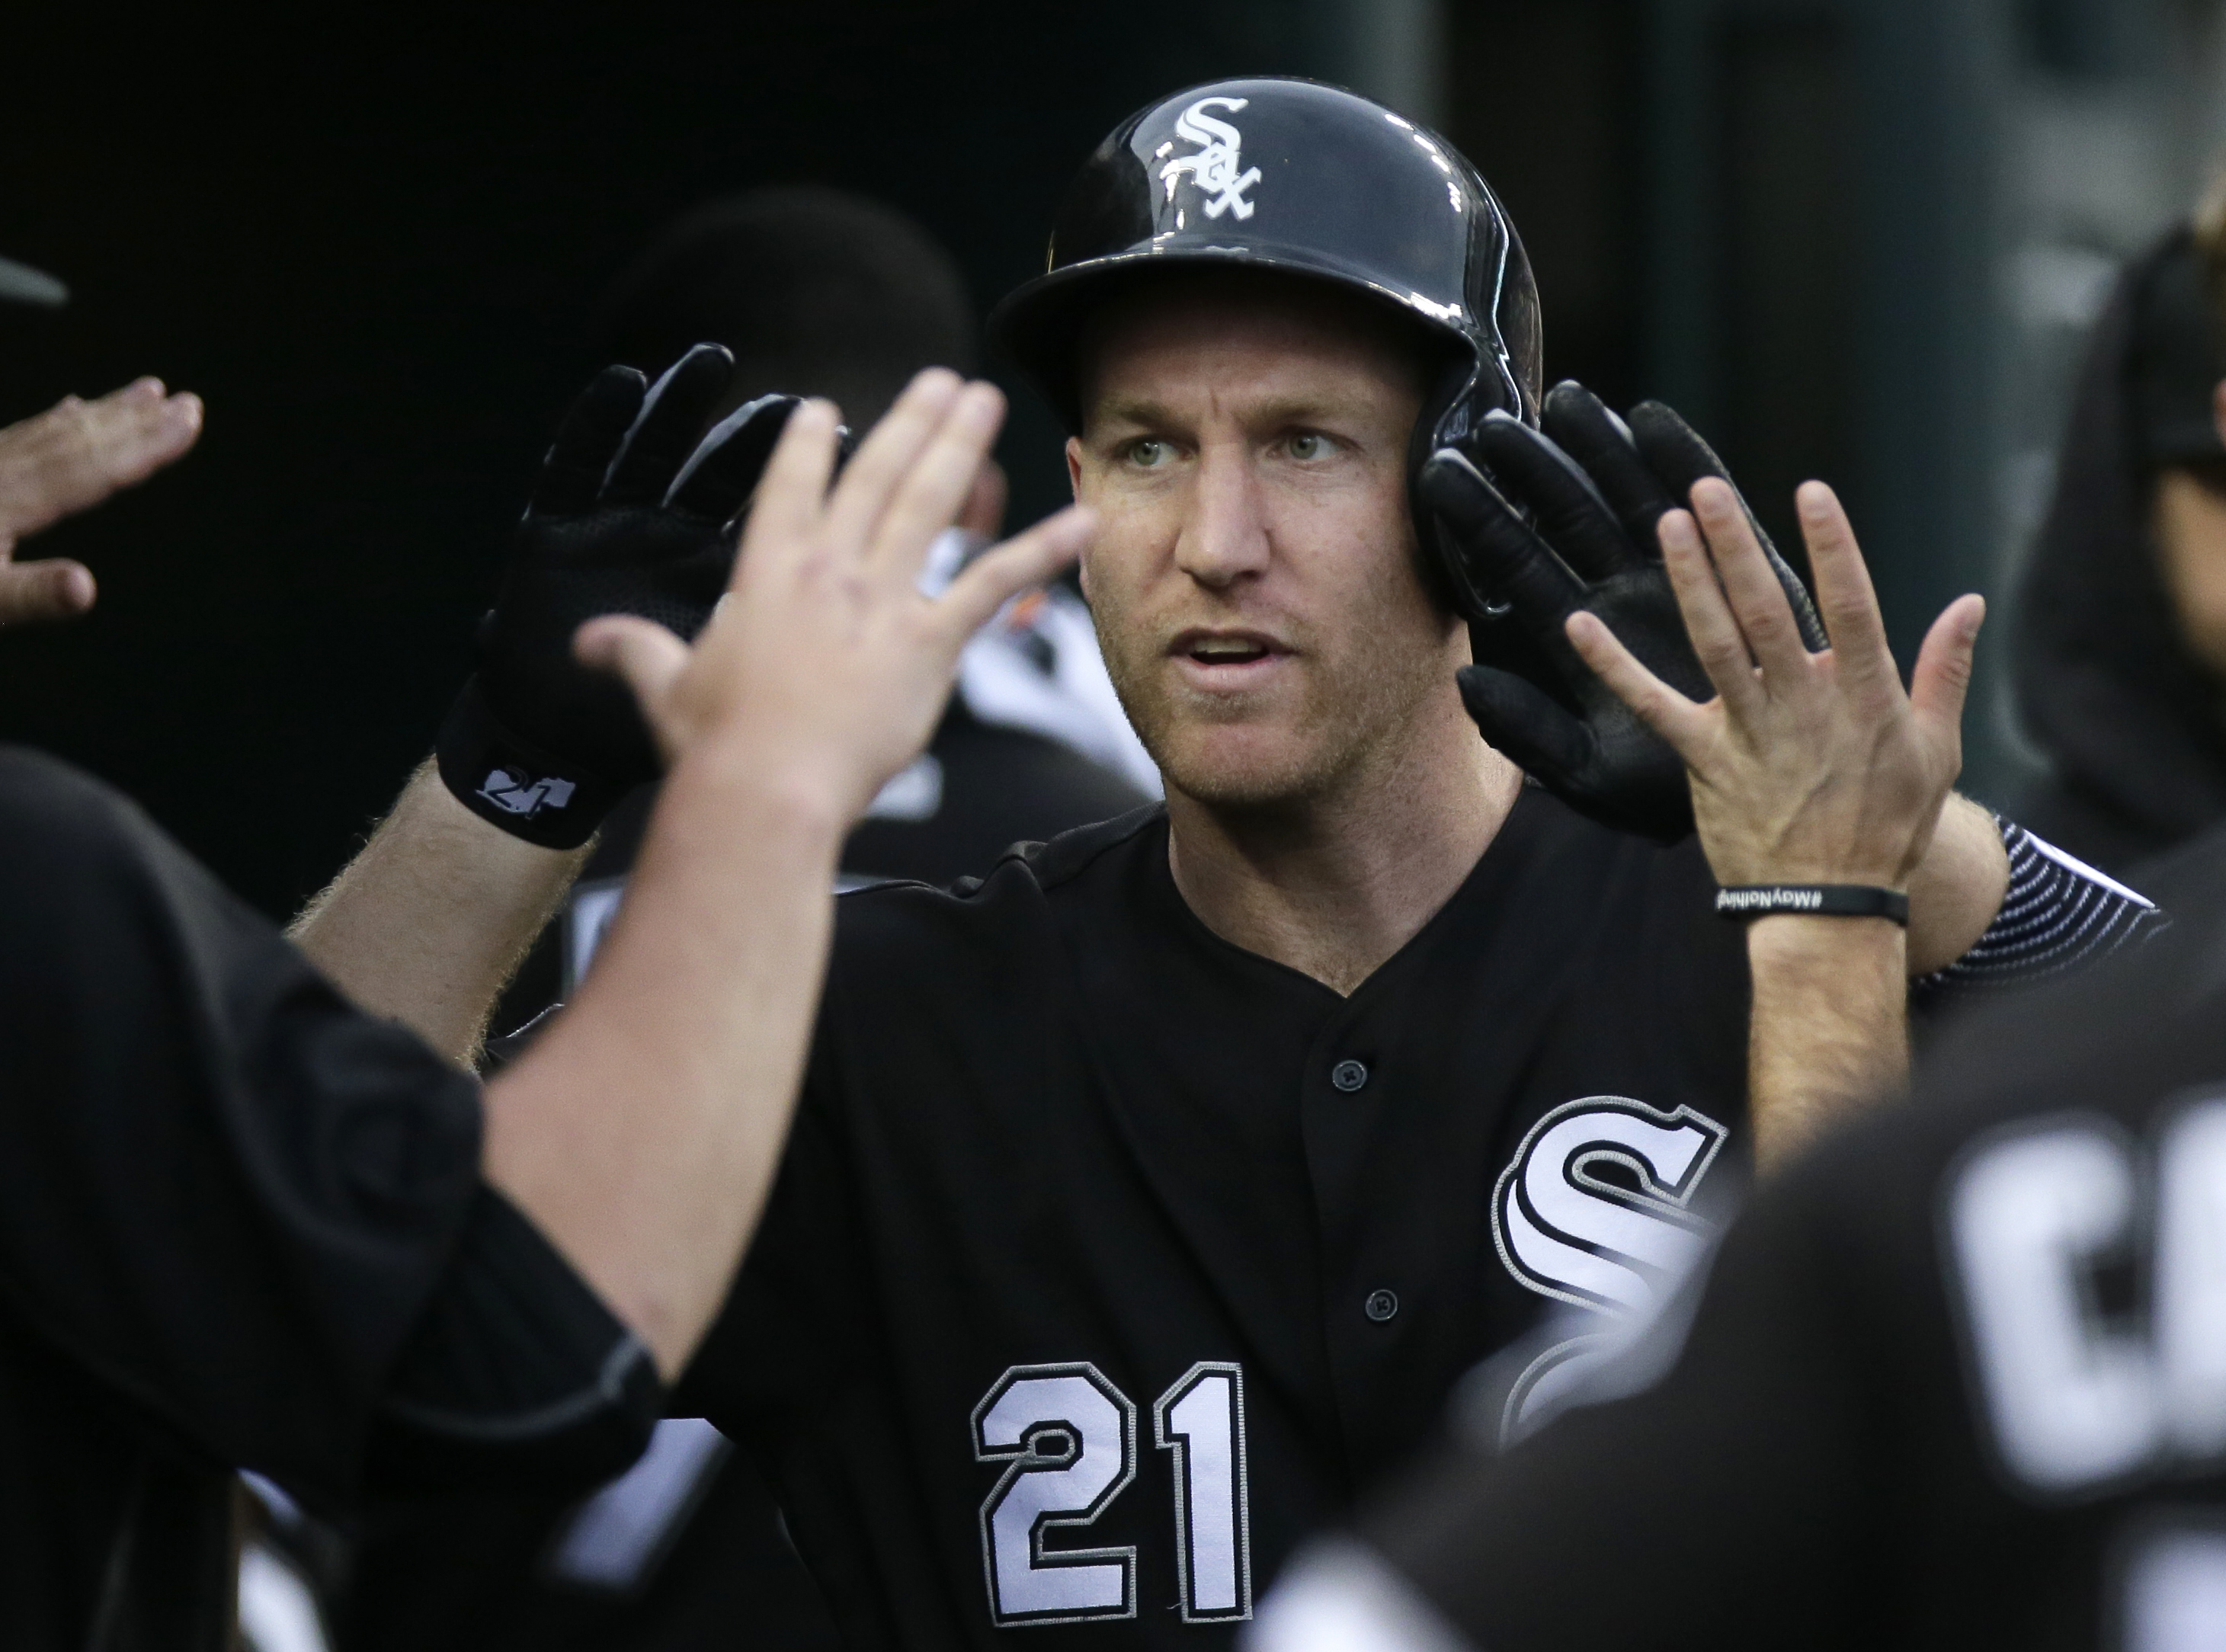 Todd Frazier, Chris Carter and the Most “Average” 40-Homer Seasons Since 2002